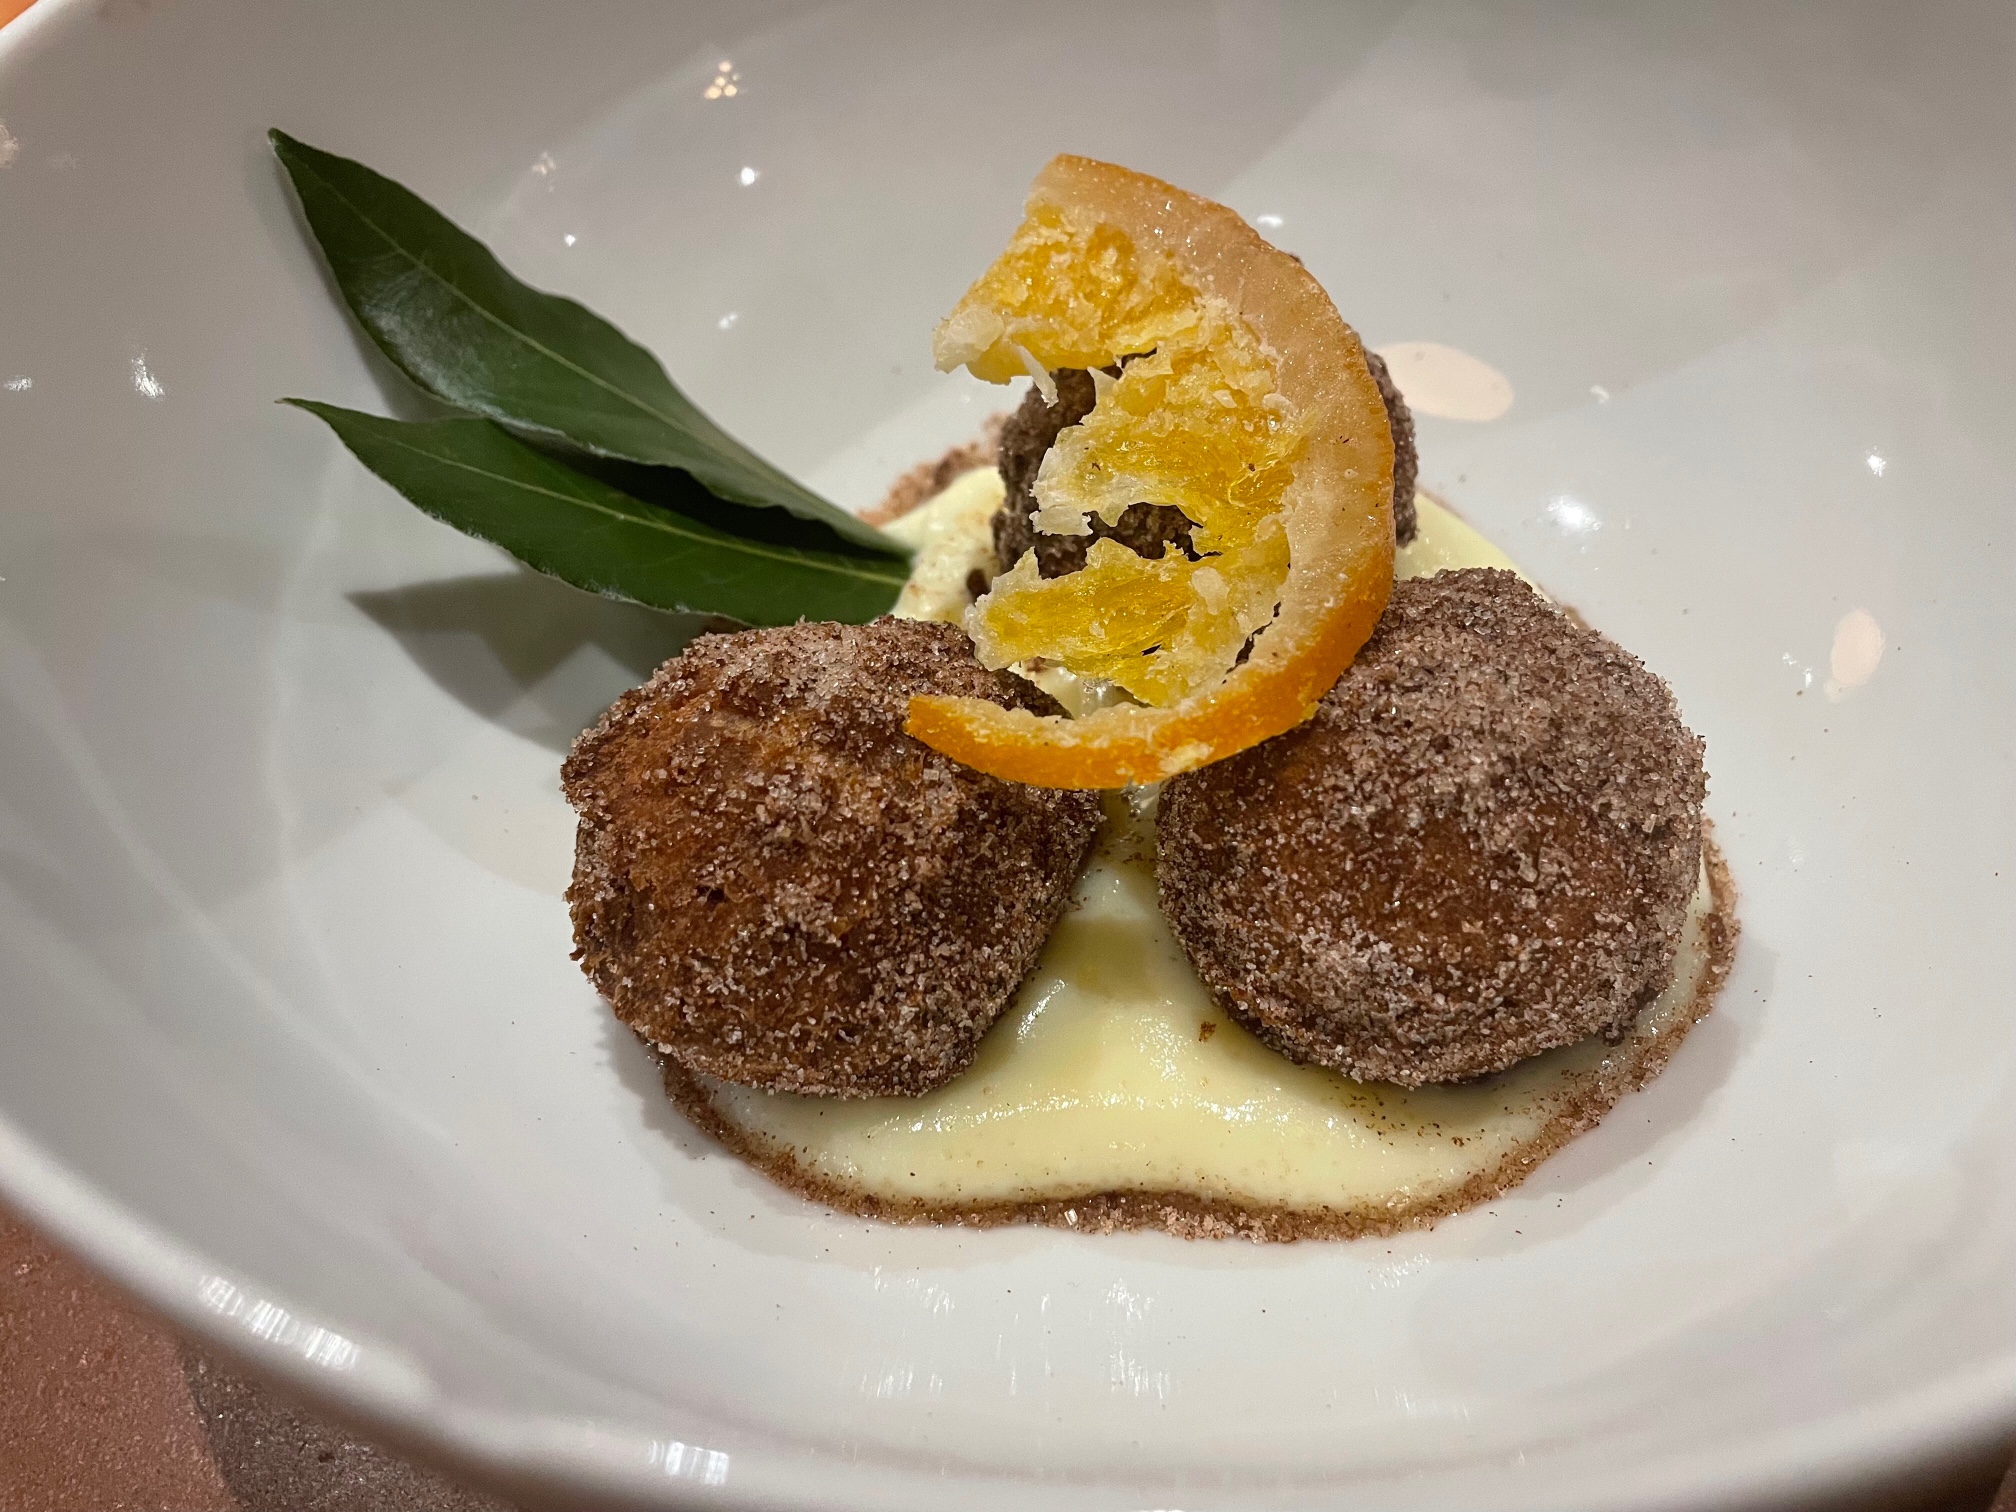 In a large white bowl, there are three balls of donuts covered in cinnamon sugar topped with a candied orange slice. Beneath the balls is a white pastry cream and two bay leaves. Photo by Alyssa Buckley.